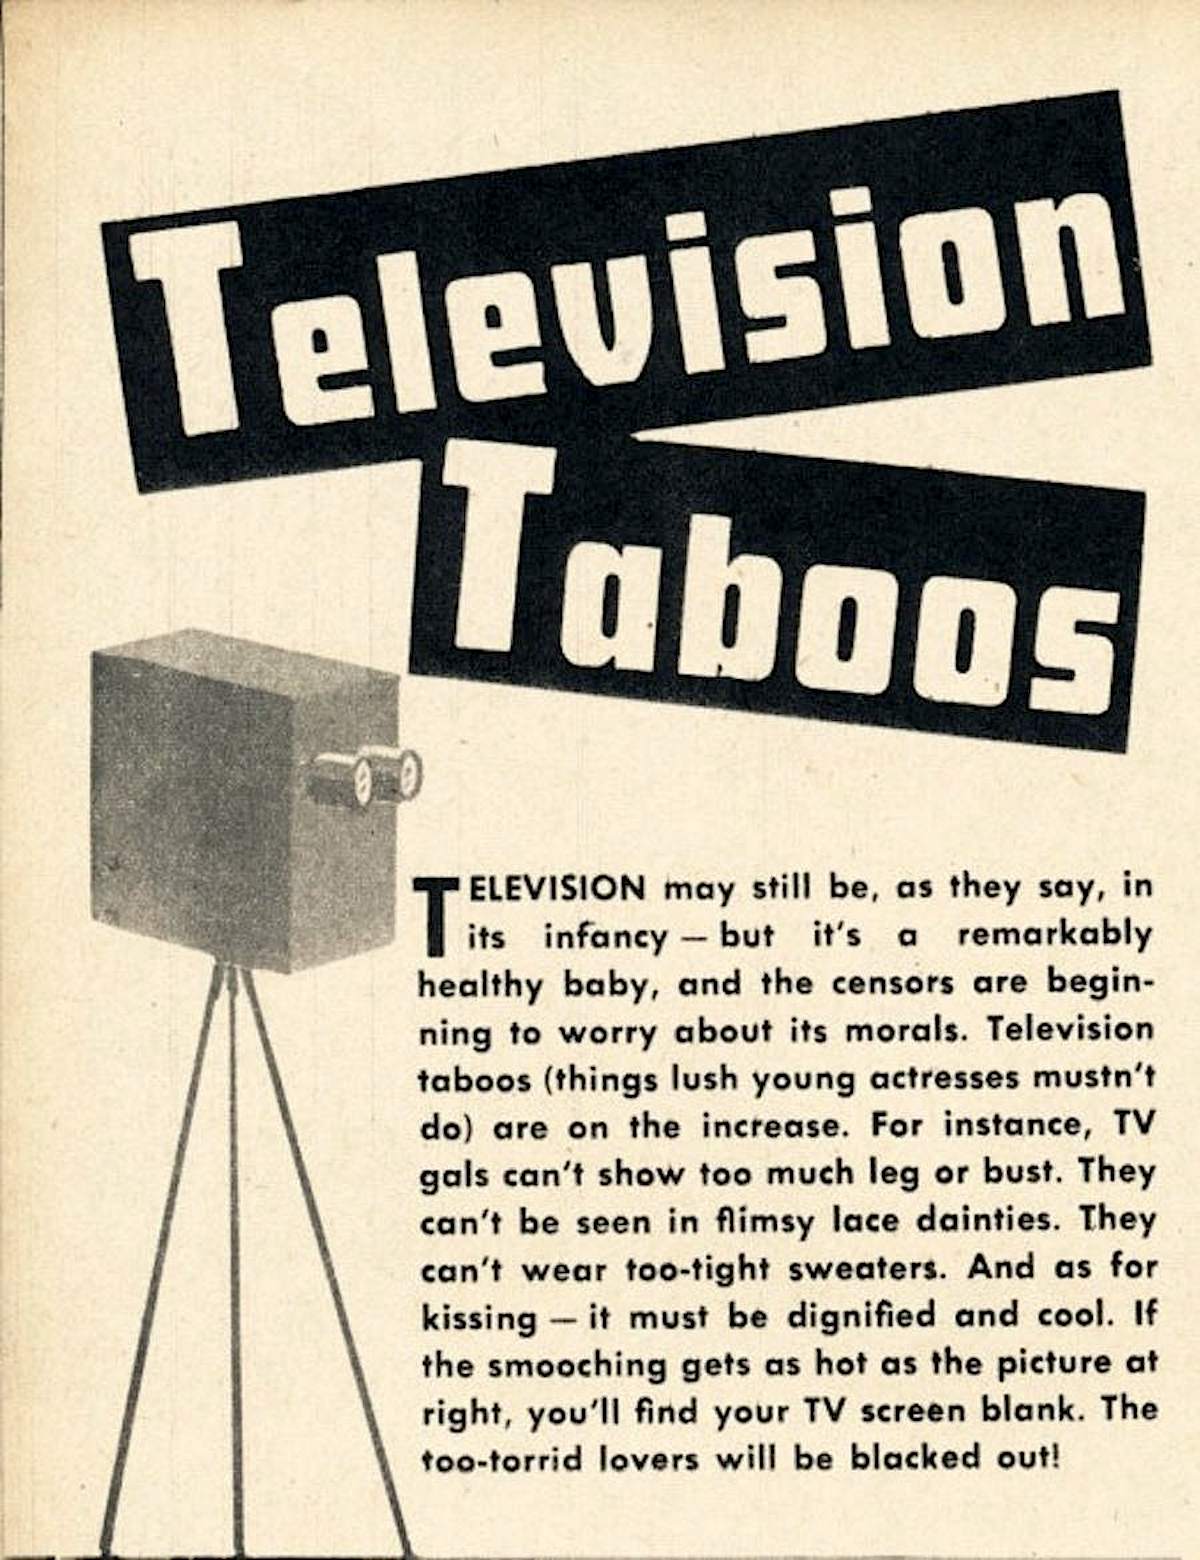 Television Taboos guidebook rules.